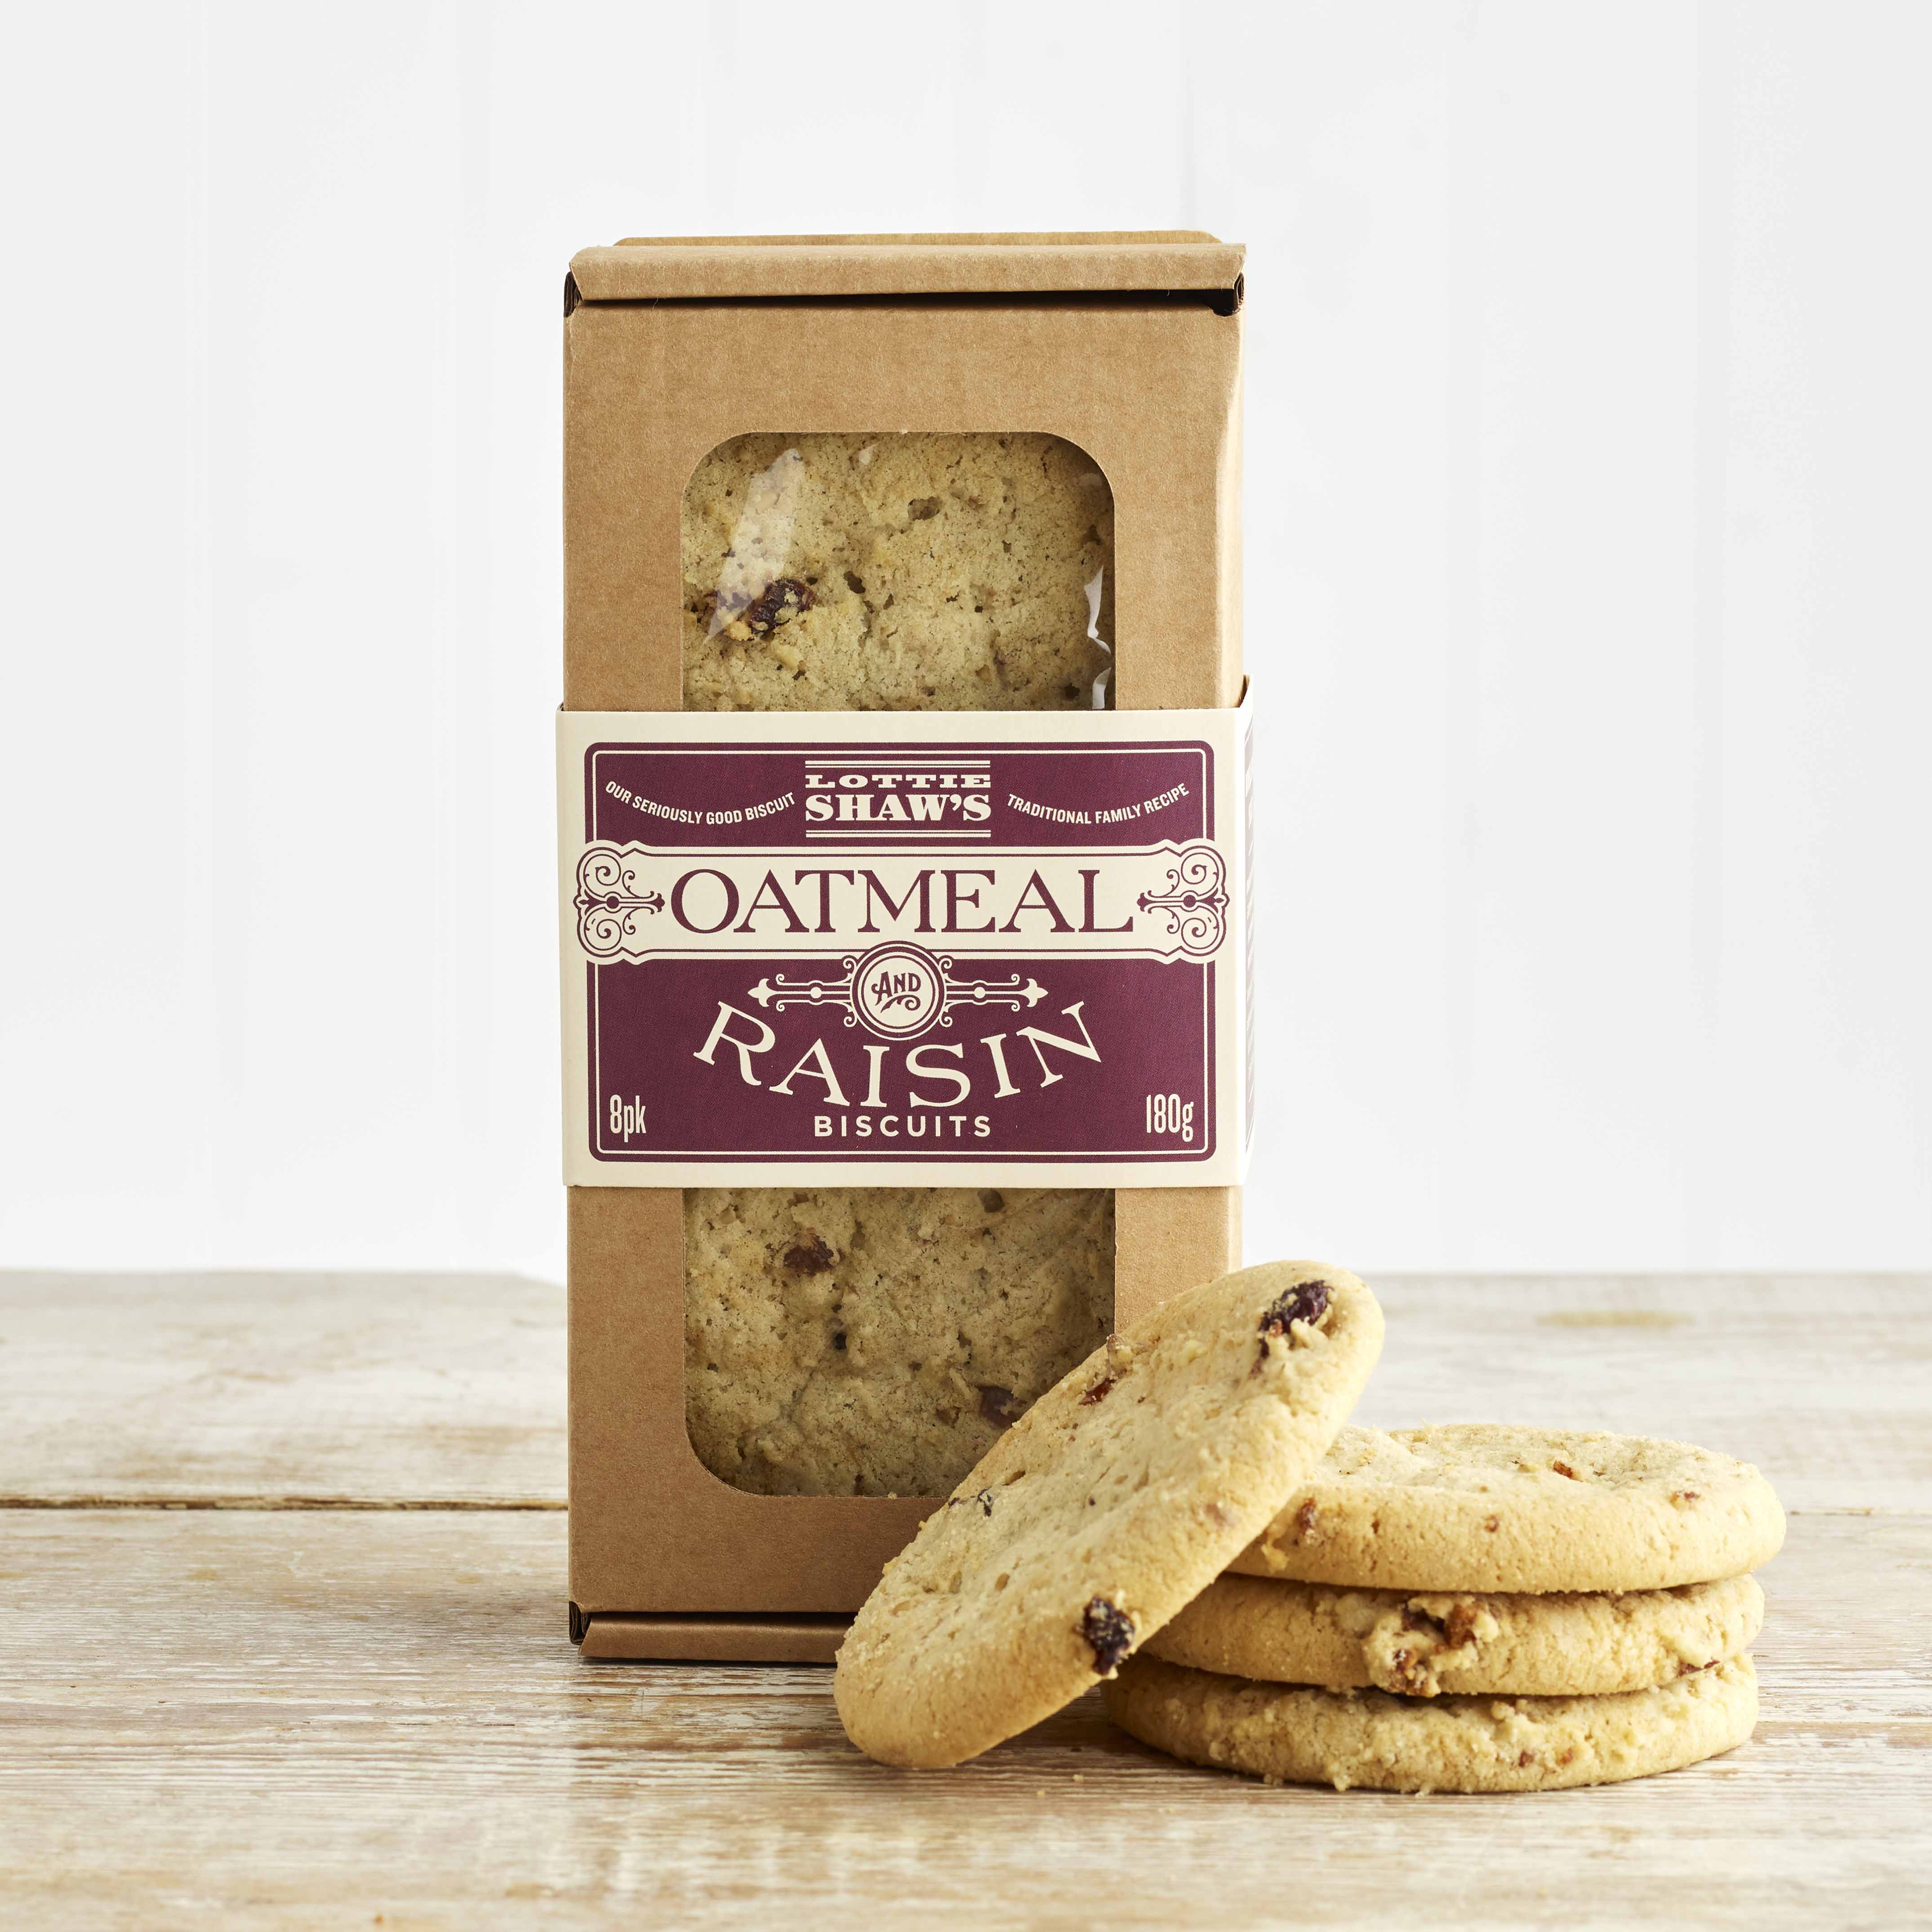 Lottie Shaw’s Oatmeal and Raisin Biscuits, 180g